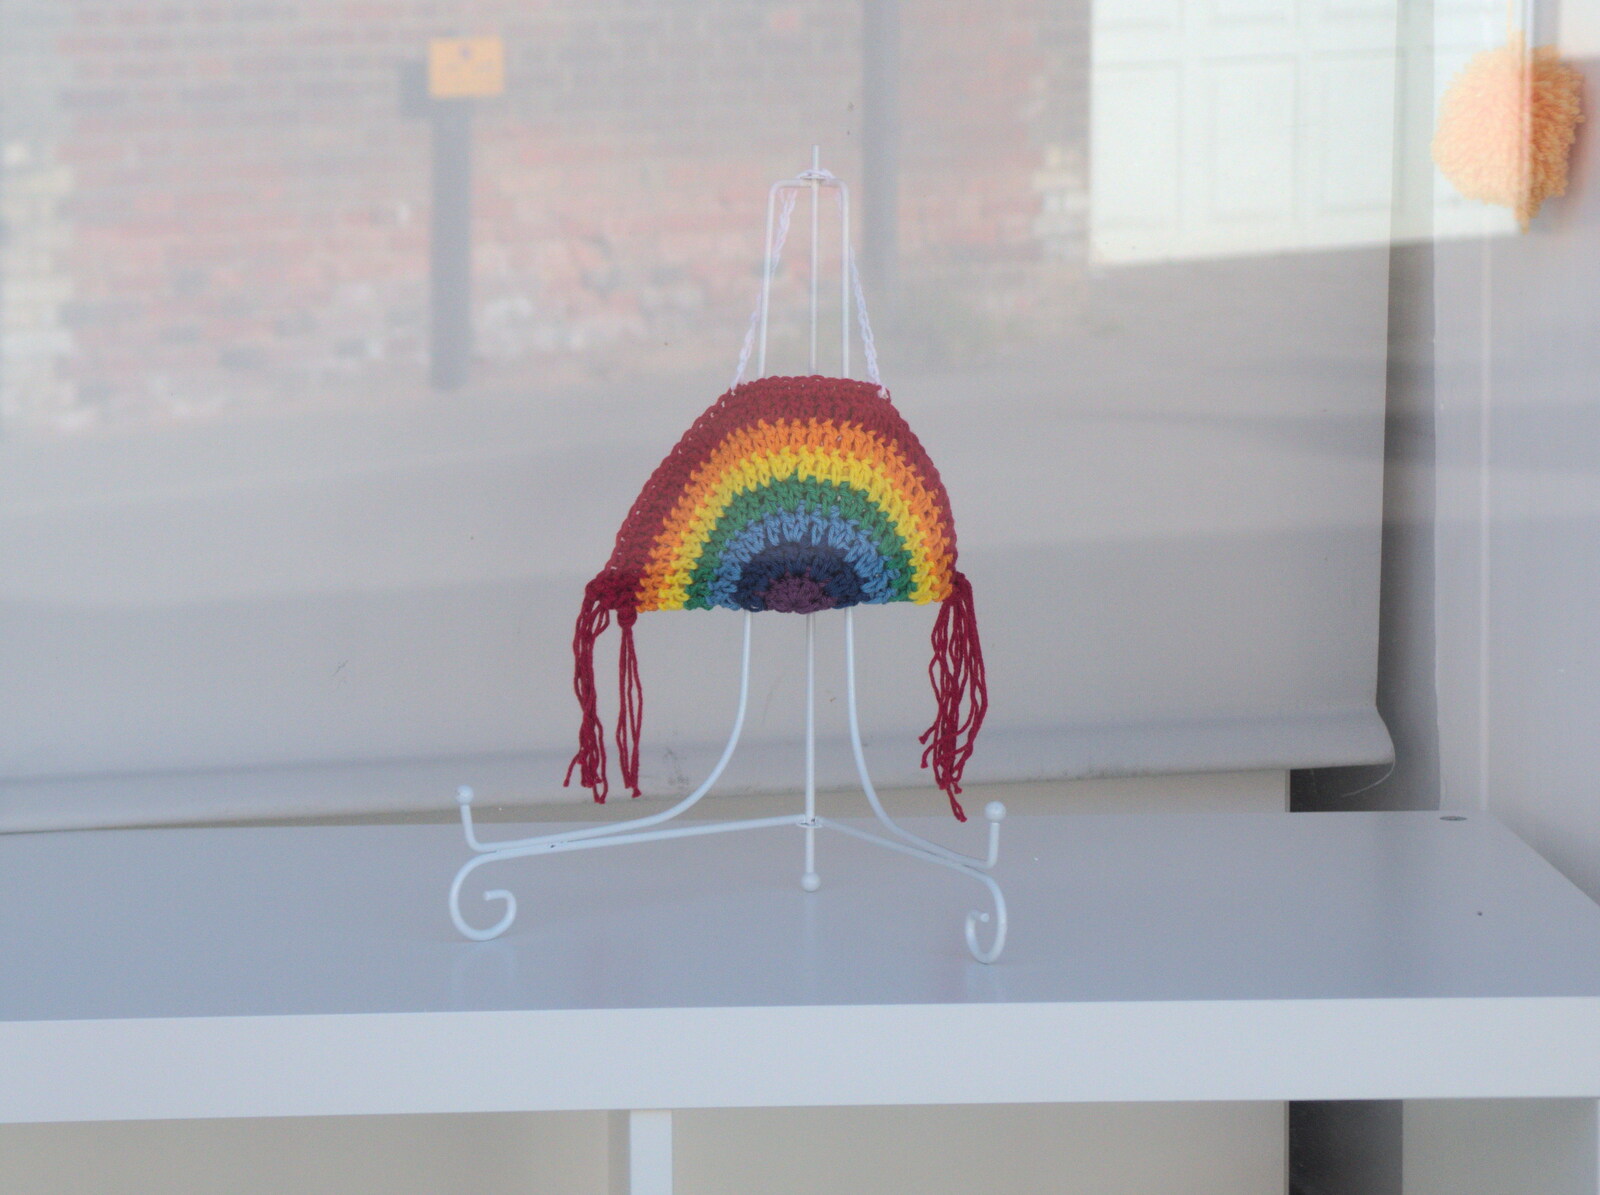 A knitted rainbow from An April Lockdown Miscellany, Eye, Suffolk - 10th April 2020